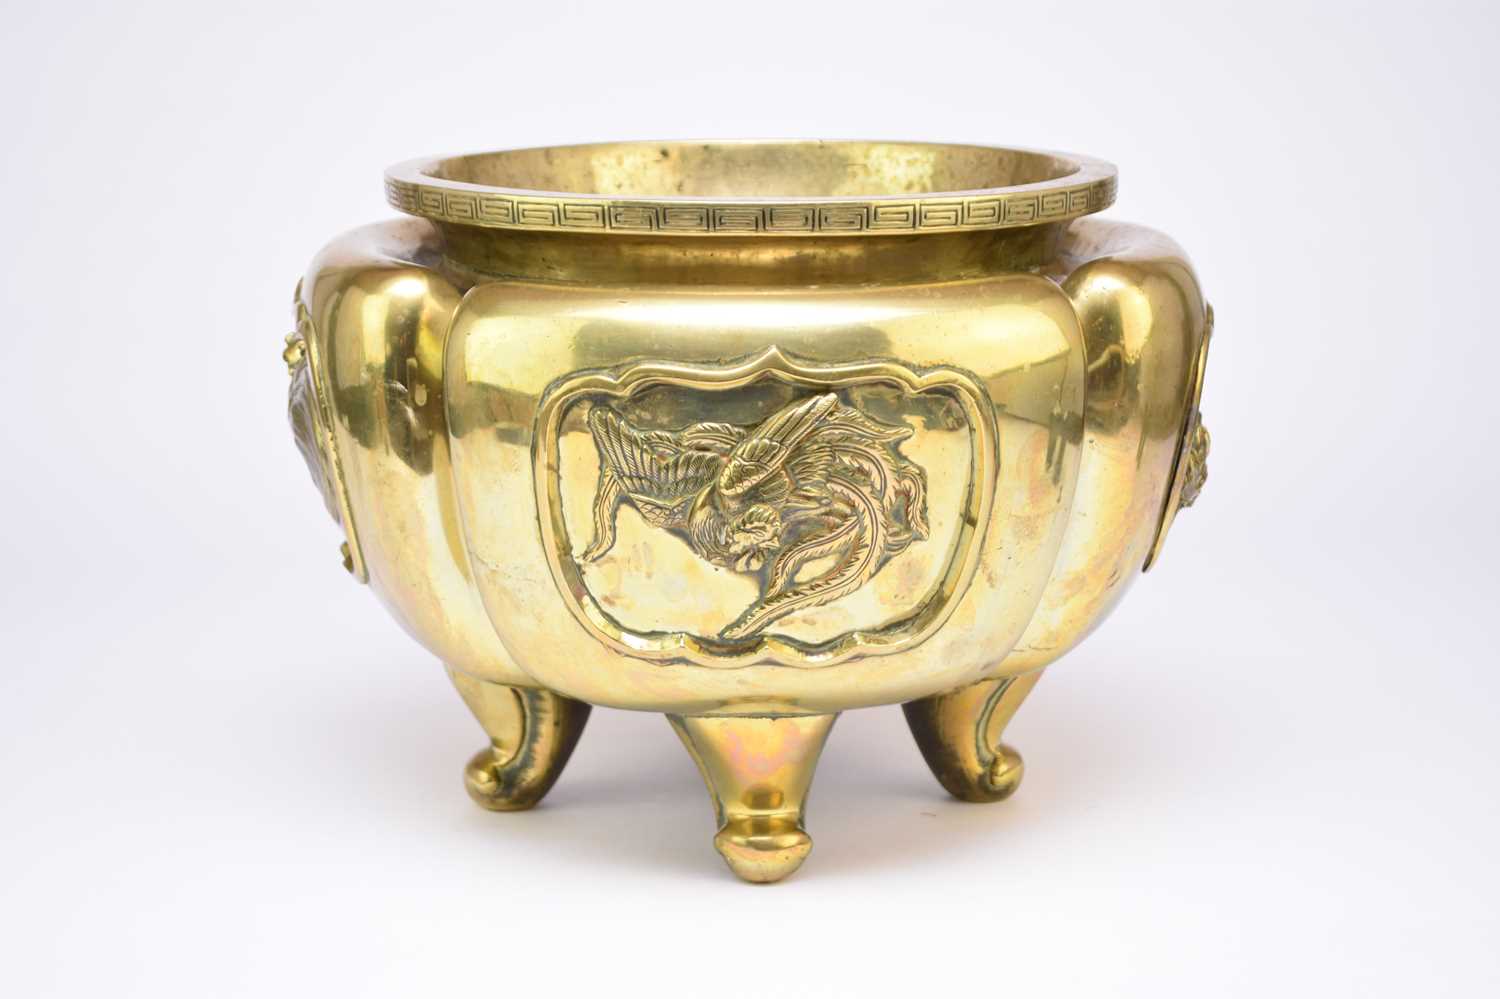 A large Chinese bronze censer, Qing Dynasty, 19th century - Image 6 of 6